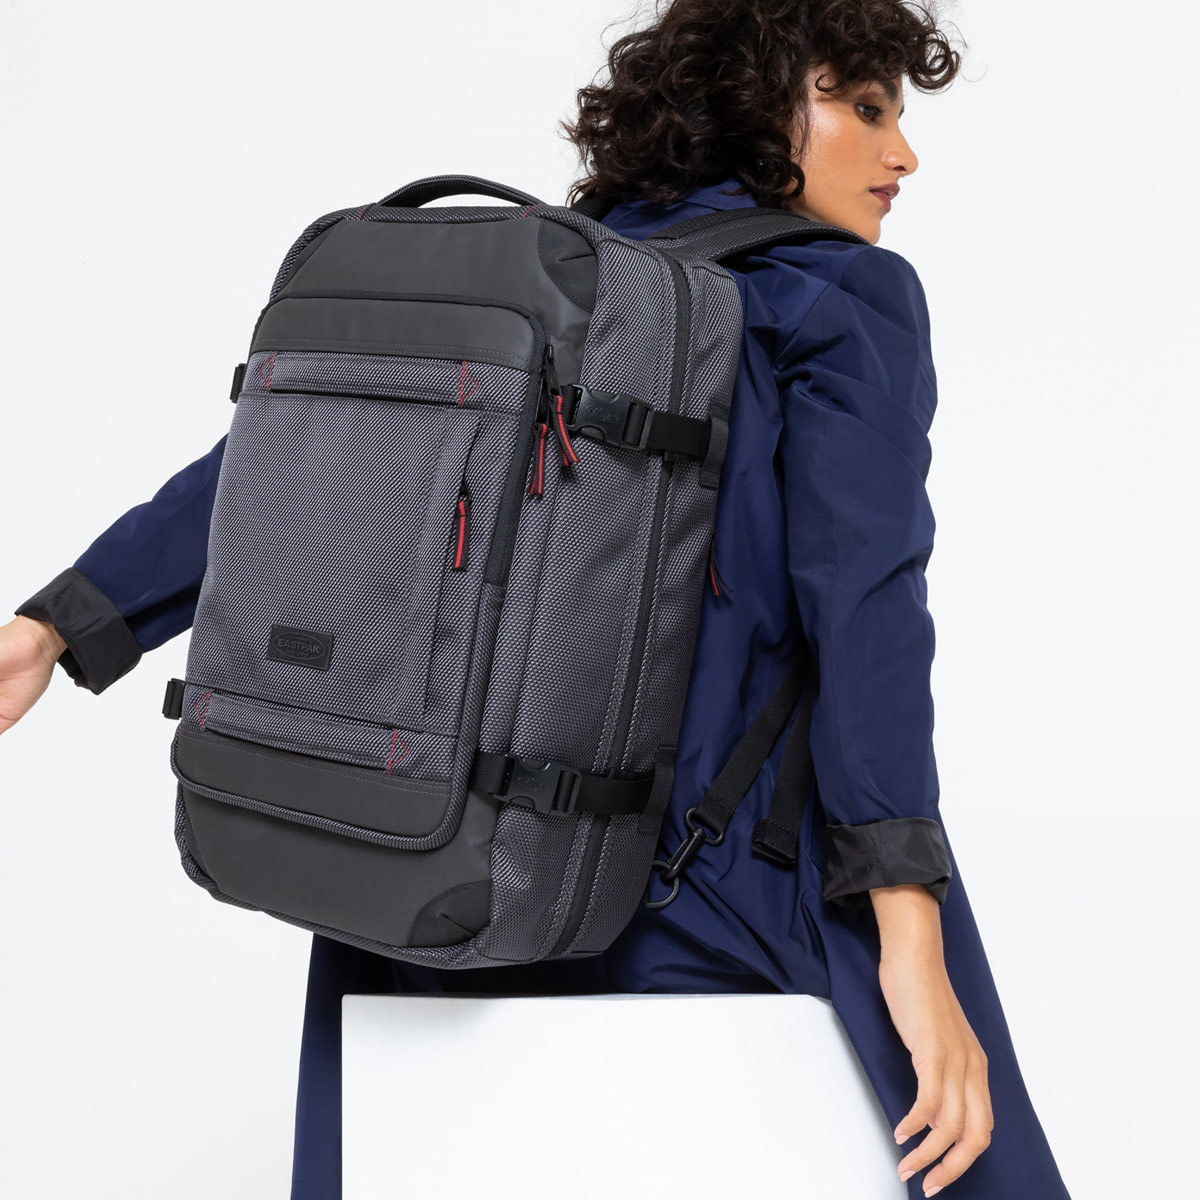 Carry-on backpack for women